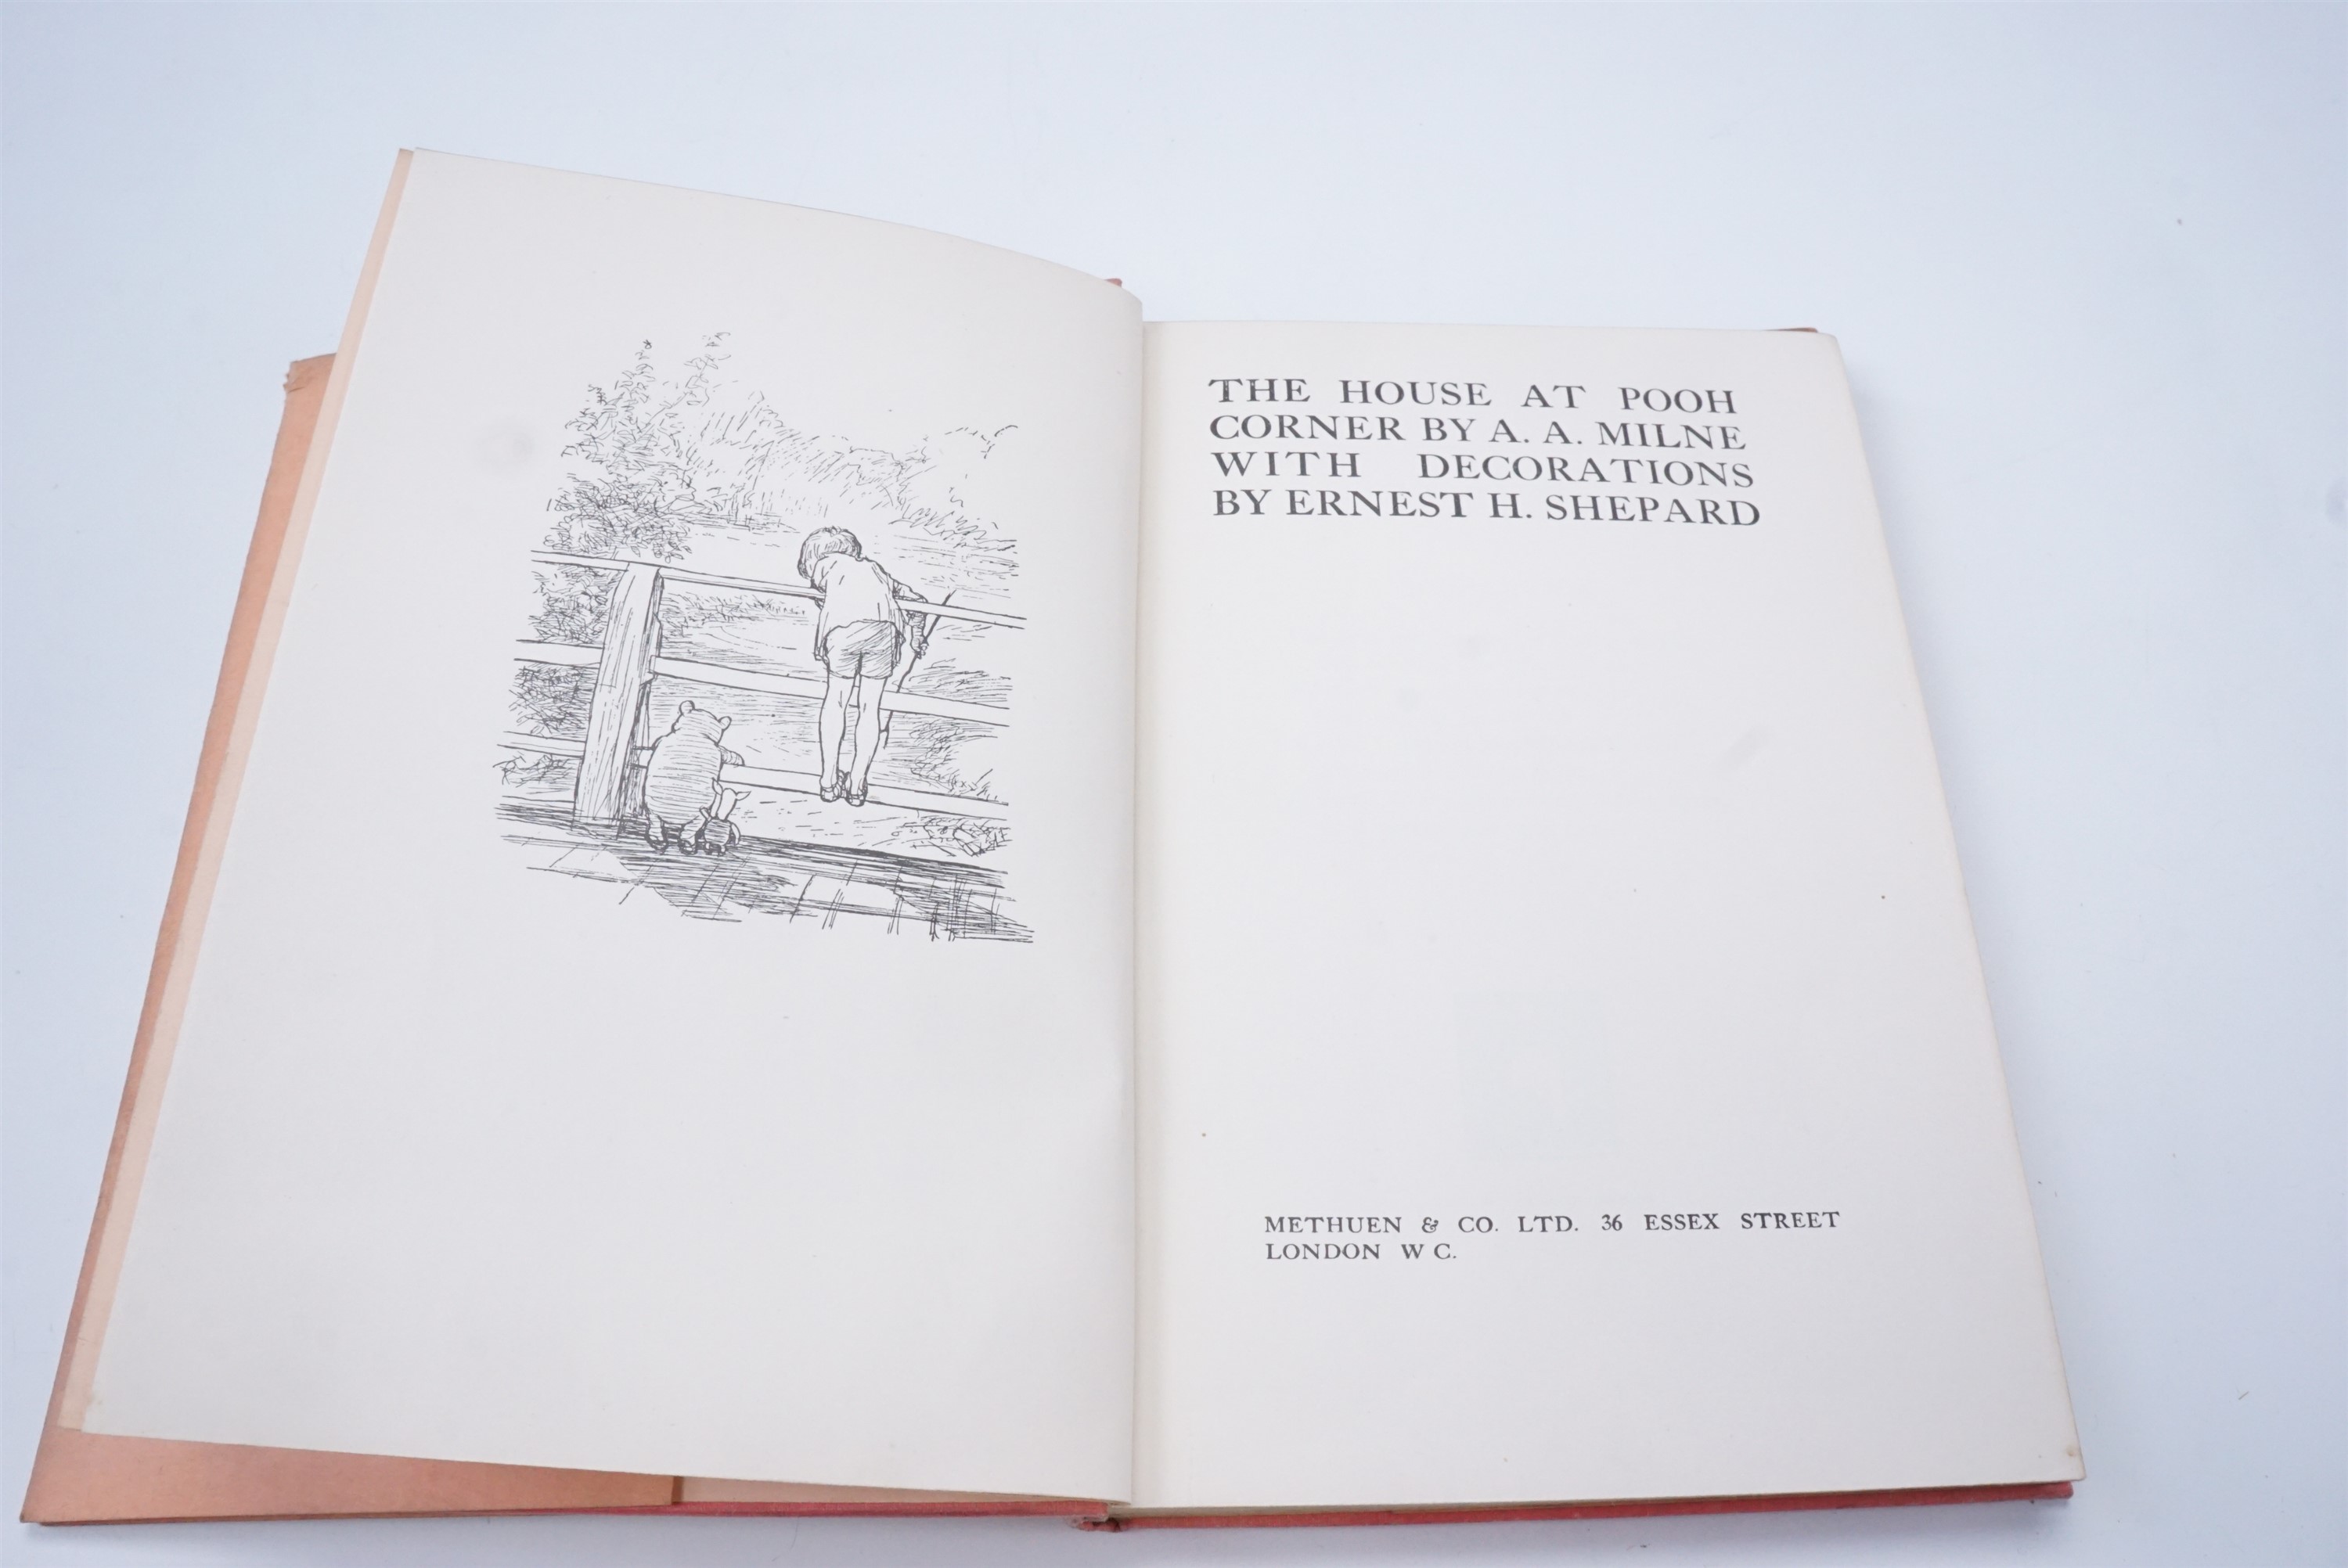 A A Milne, "The House at Pooh Corner", Methuen, 1928, first edition in dust wrapper, gilt - Image 3 of 3